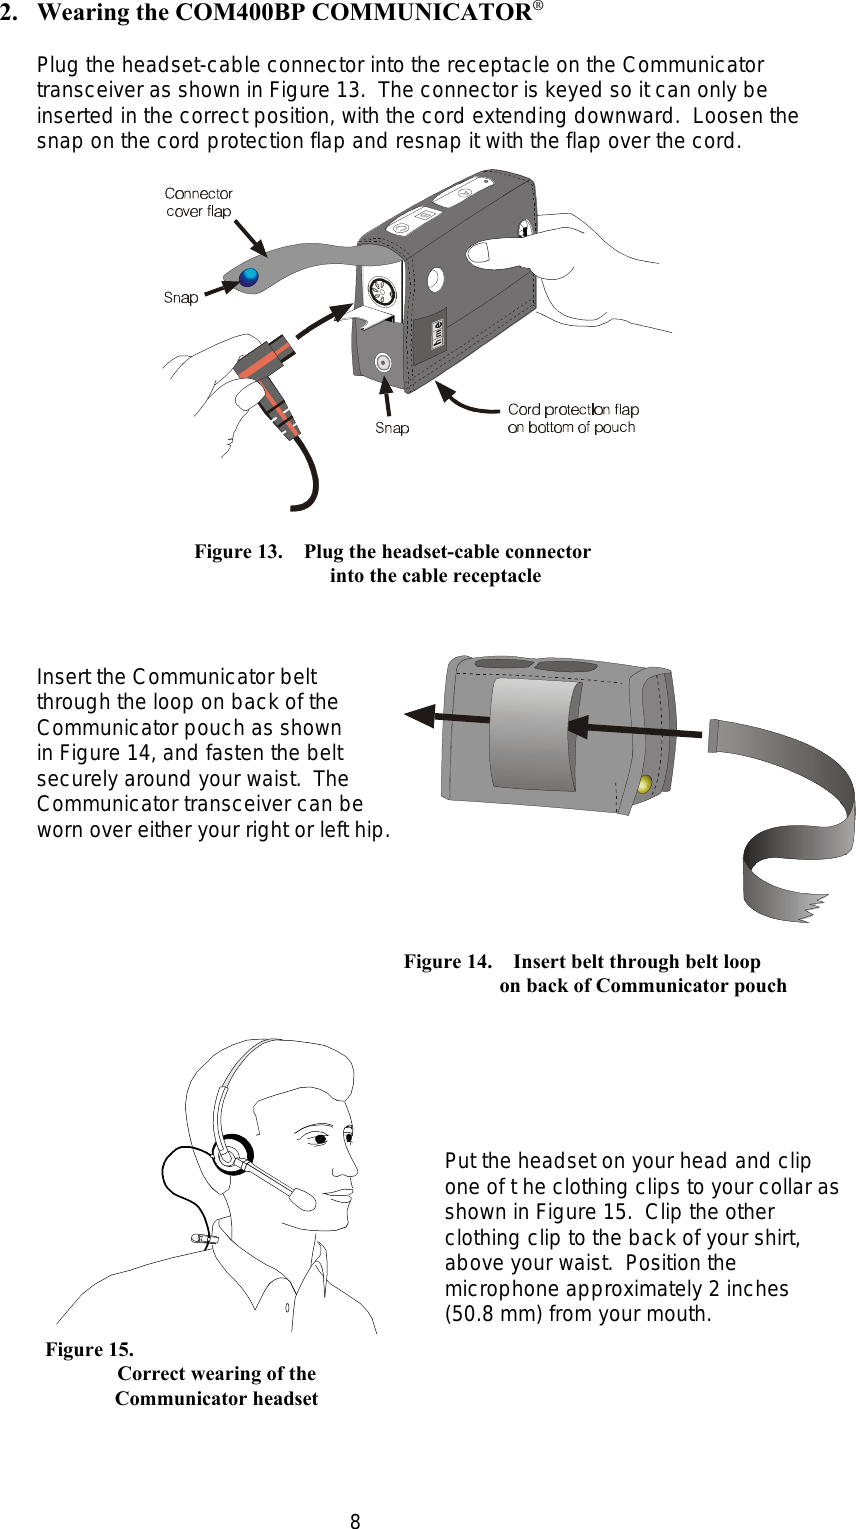 8           Figure 13.    Plug the headset-cable connector       into the cable receptacleFigure 14.    Insert belt through belt loop    on back of Communicator pouch      Figure 15.Correct wearing of theCommunicator headset2. Wearing the COM400BP COMMUNICATOR®Plug the headset-cable connector into the receptacle on the Communicatortransceiver as shown in Figure 13.  The connector is keyed so it can only beinserted in the correct position, with the cord extending downward.  Loosen thesnap on the cord protection flap and resnap it with the flap over the cord.Insert the Communicator beltthrough the loop on back of theCommunicator pouch as shown in Figure 14, and fasten the beltsecurely around your waist.  TheCommunicator transceiver can beworn over either your right or left hip.Put the headset on your head and clipone of t he clothing clips to your collar asshown in Figure 15.  Clip the otherclothing clip to the back of your shirt,above your waist.  Position themicrophone approximately 2 inches(50.8 mm) from your mouth.